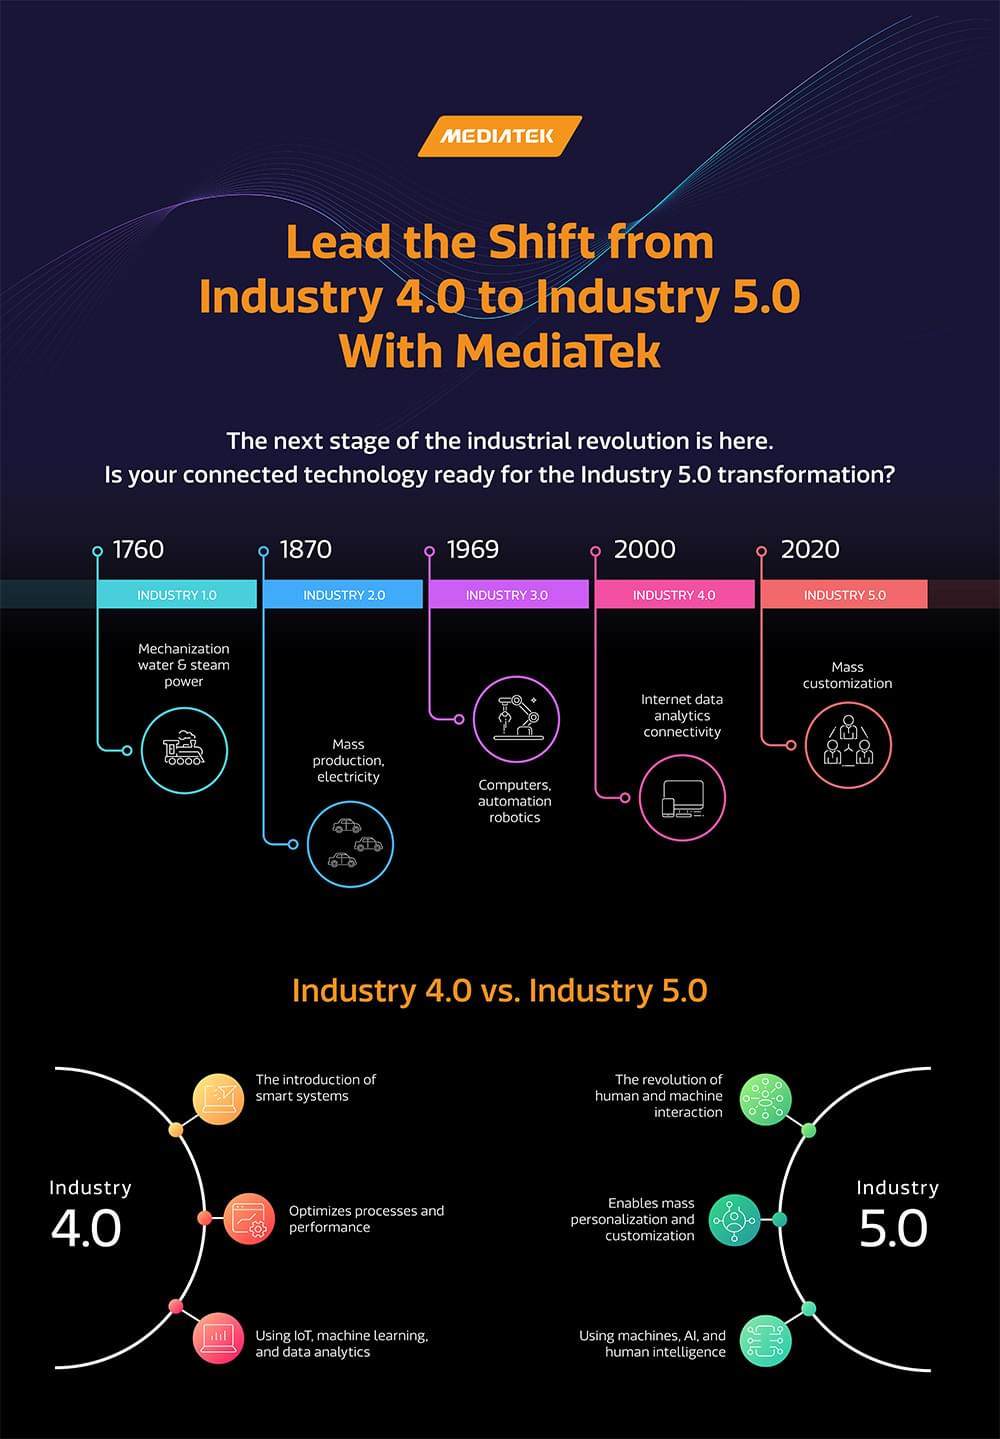 What is Industry 5.0?